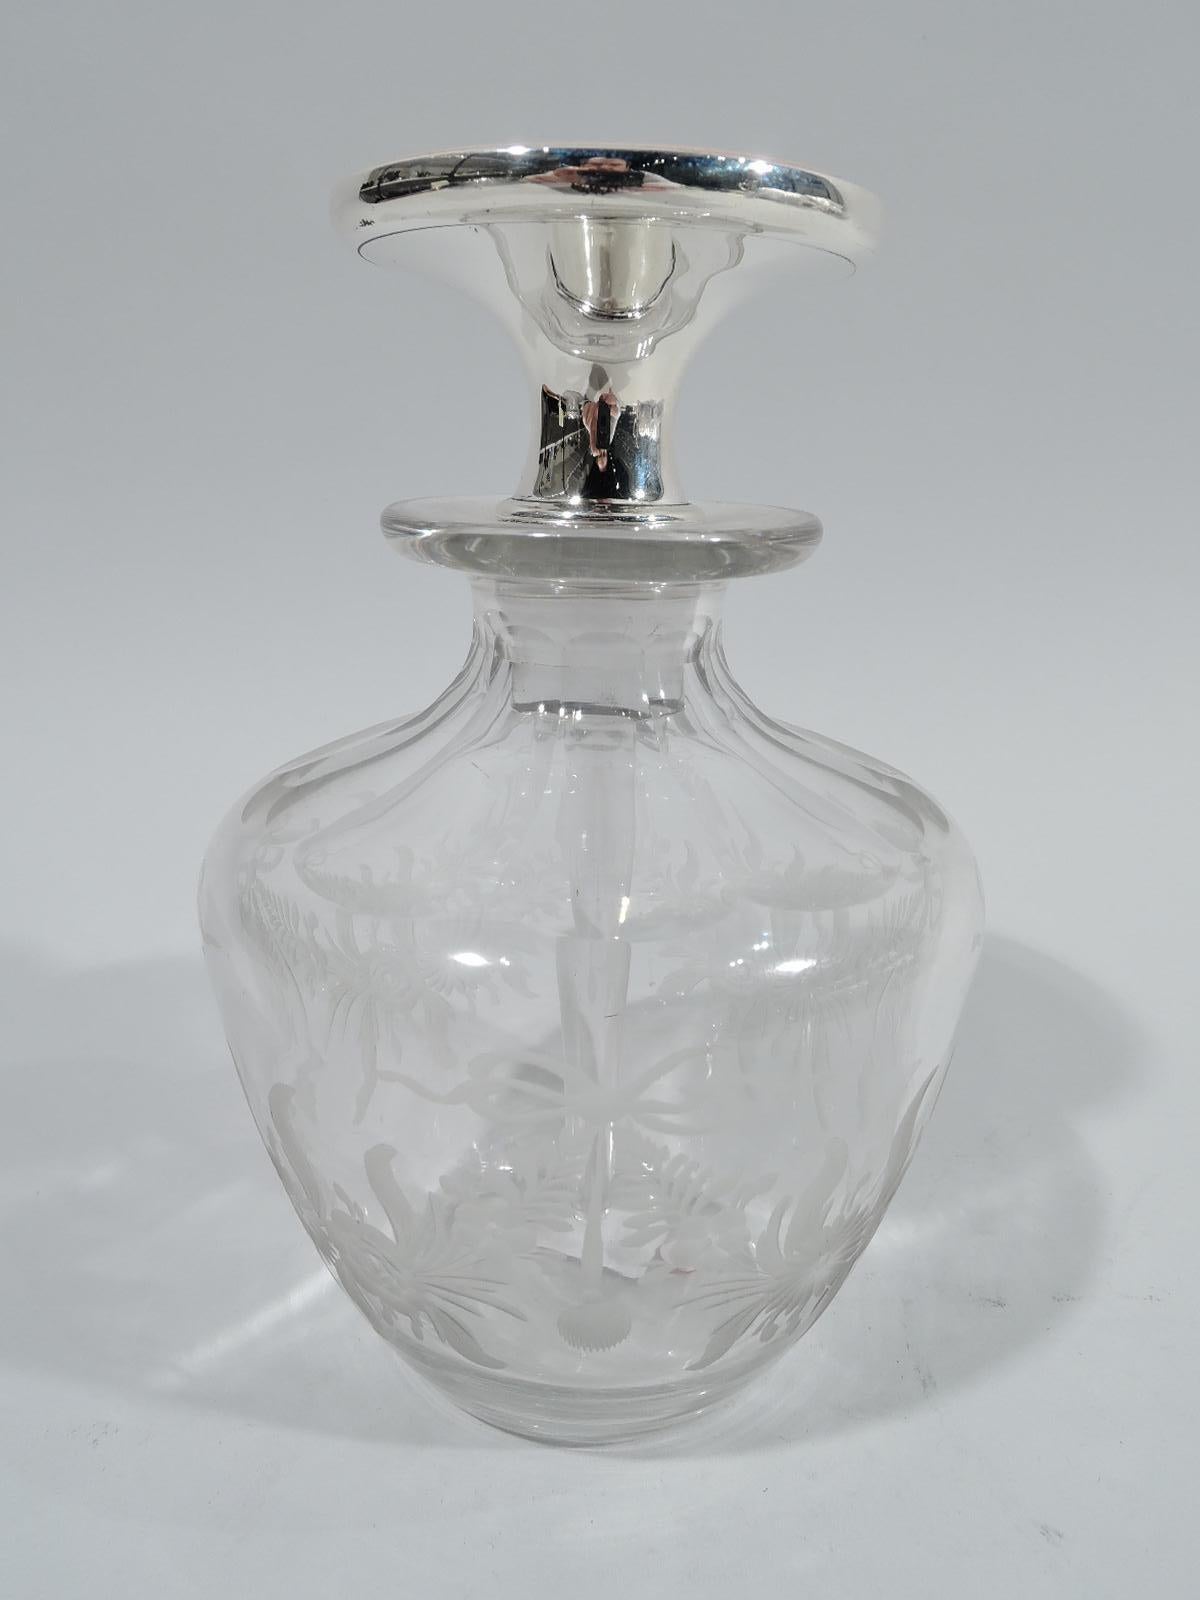 American Edwardian crystal perfume bottle with sterling silver and enamel stopper, ca 1910. Ovoid body with faceted shoulder and acid-etched floral garland. Stopper has flat top with concentric pink guilloche enamel and sterling silver neck; glass